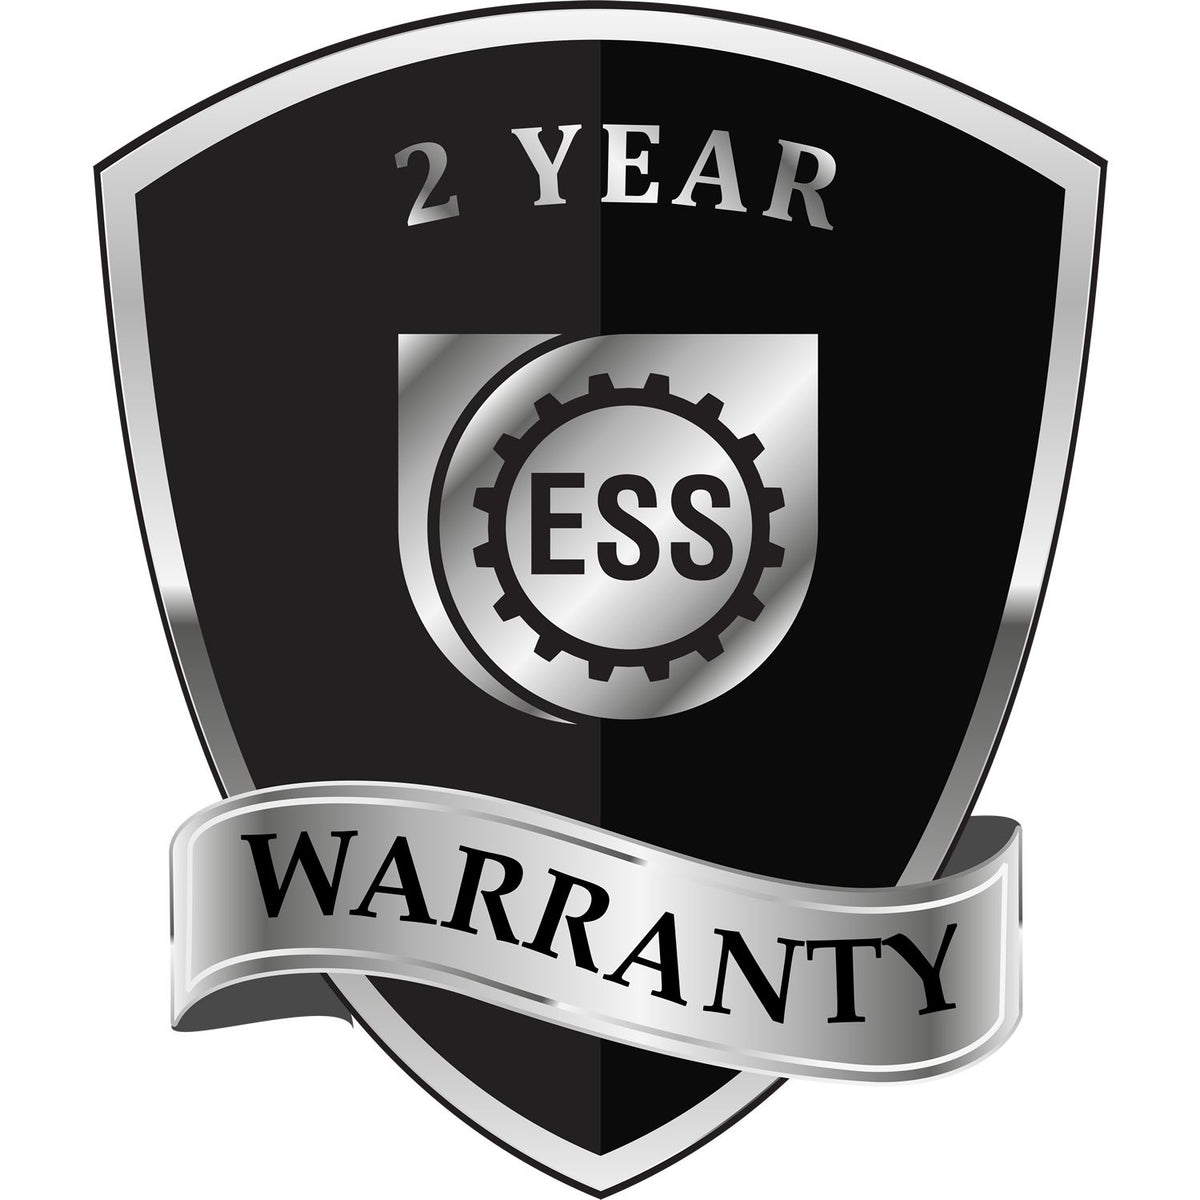 A badge or emblem showing a warranty icon for the Vermont Desk Architect Embossing Seal